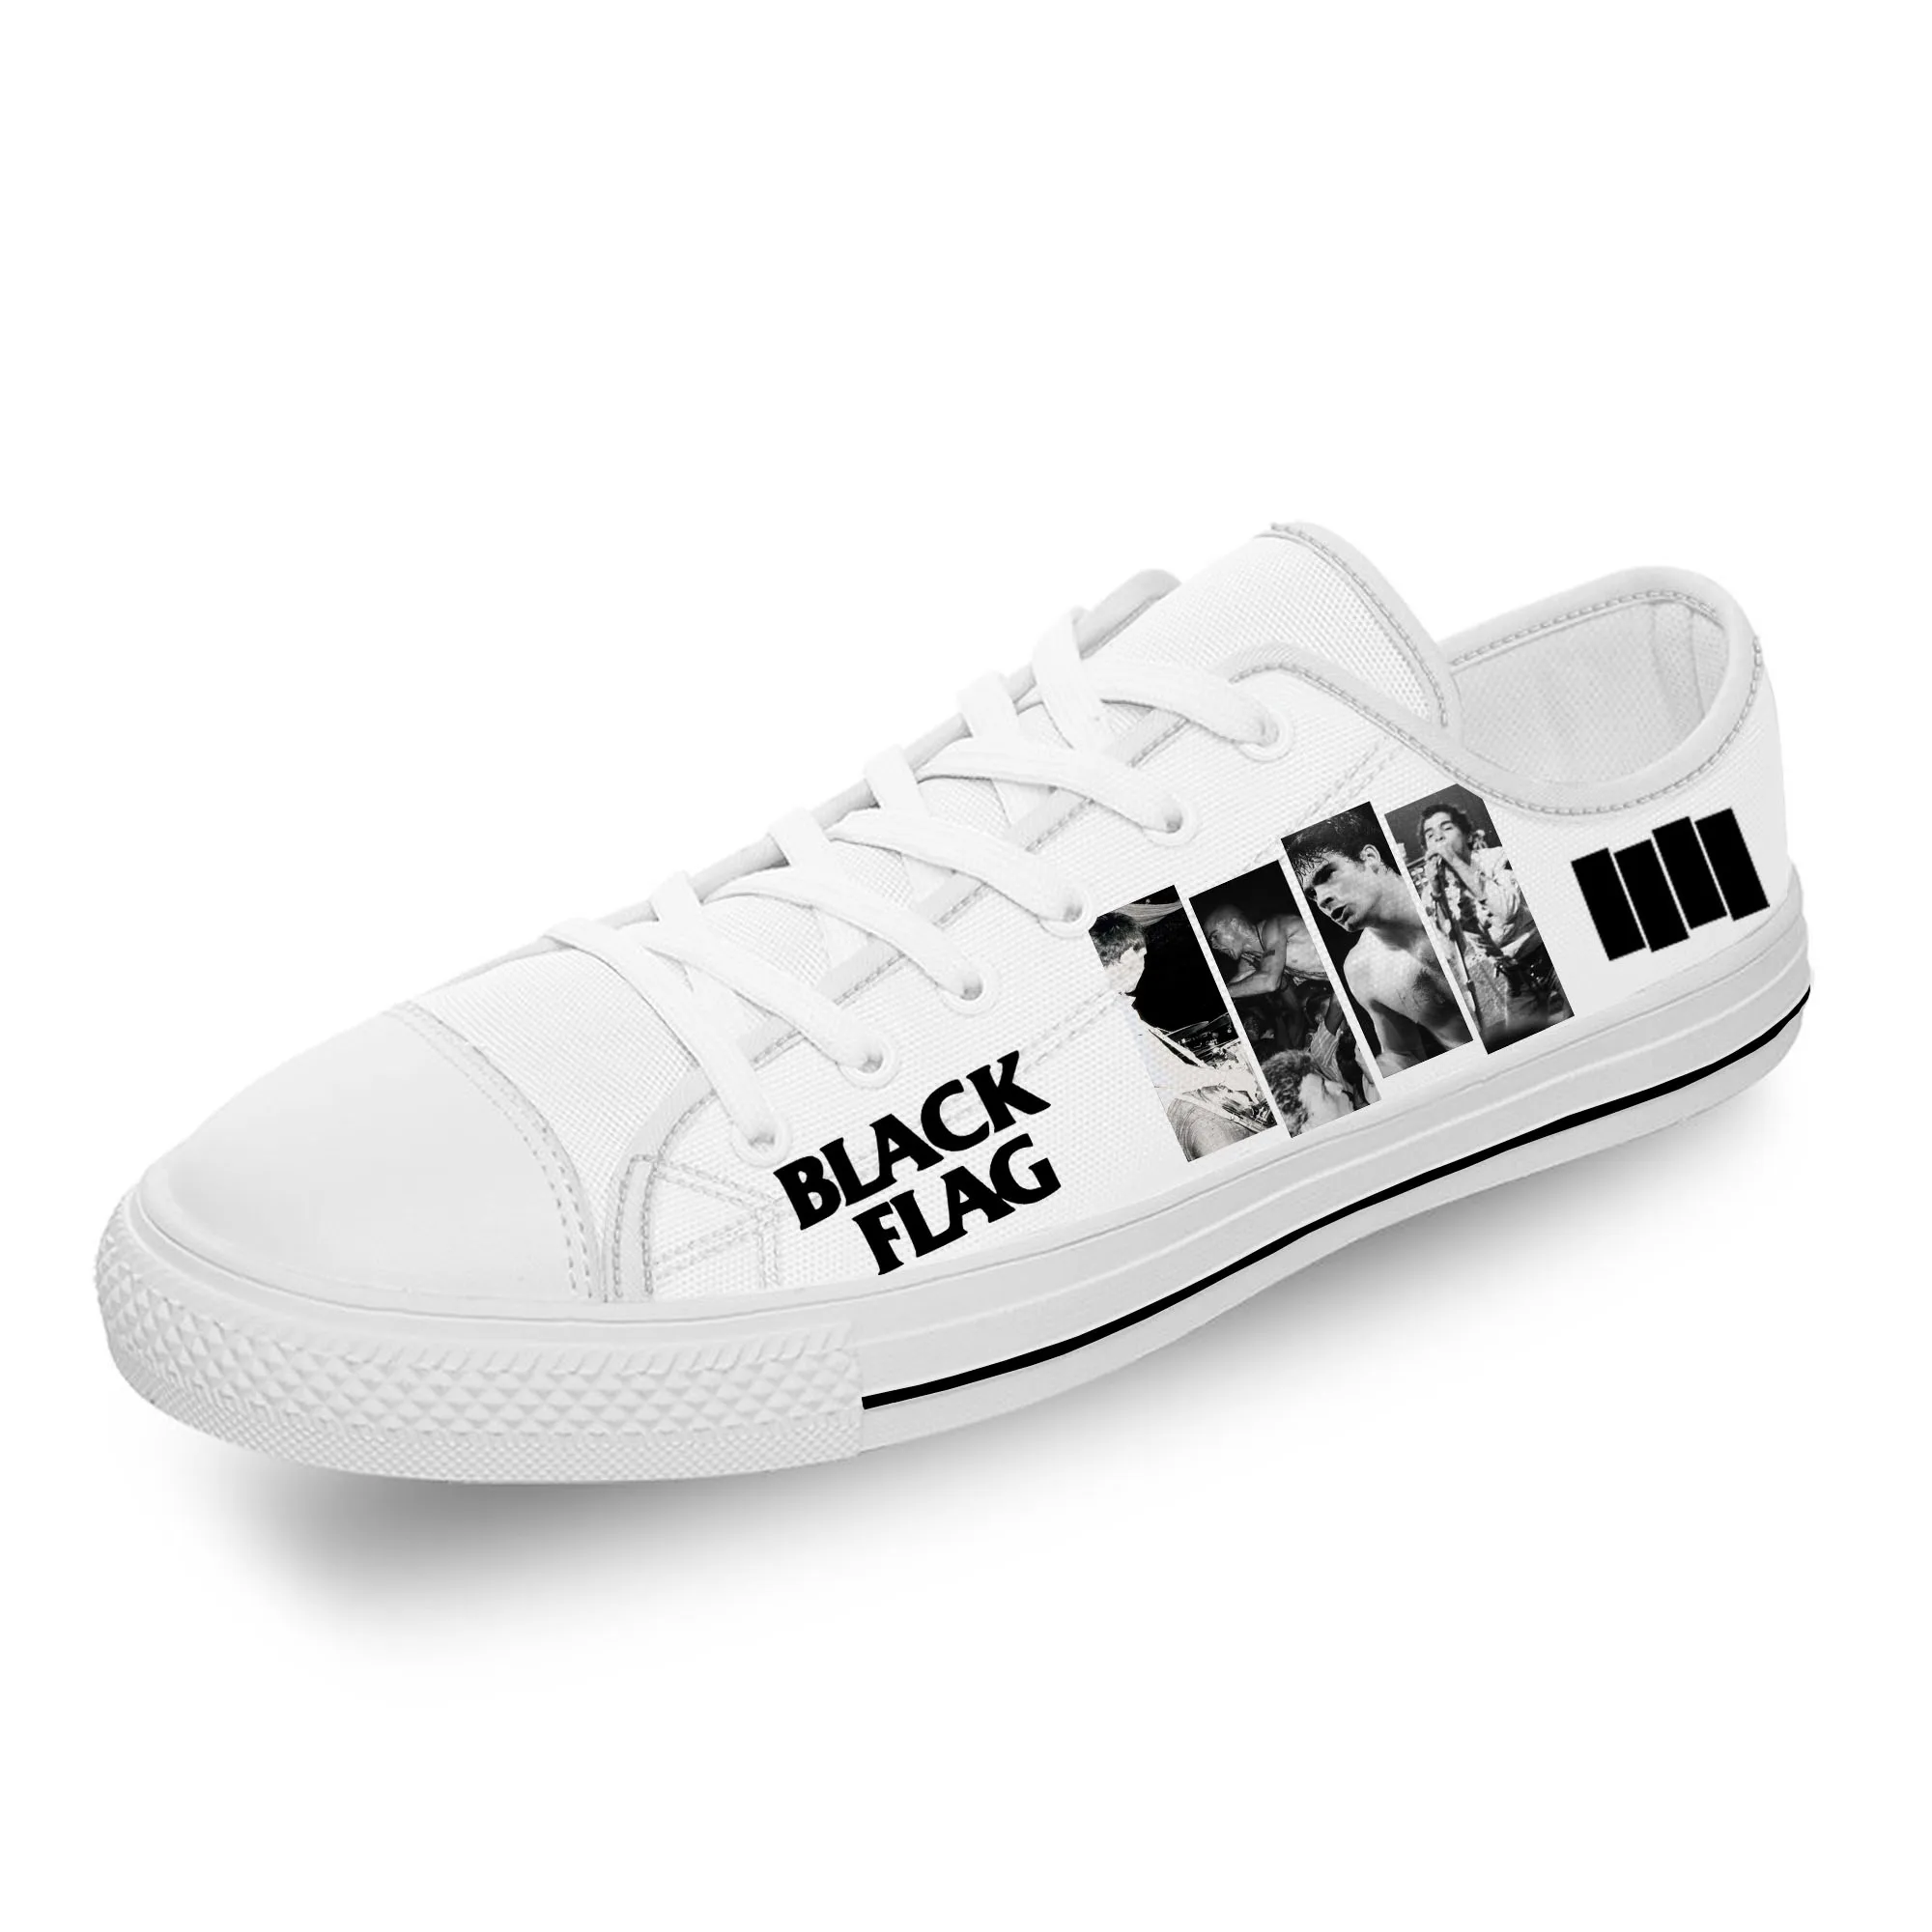 BLACK FLAG Rock Band Low Top Sneakers Mens Womens Teenager Casual Shoes Canvas Running Shoes 3D Print Designer Lightweight shoe 2090 running shoes mens trainers womens chaussures wolf grey black grape pure platinum triple white designer sneakers sports